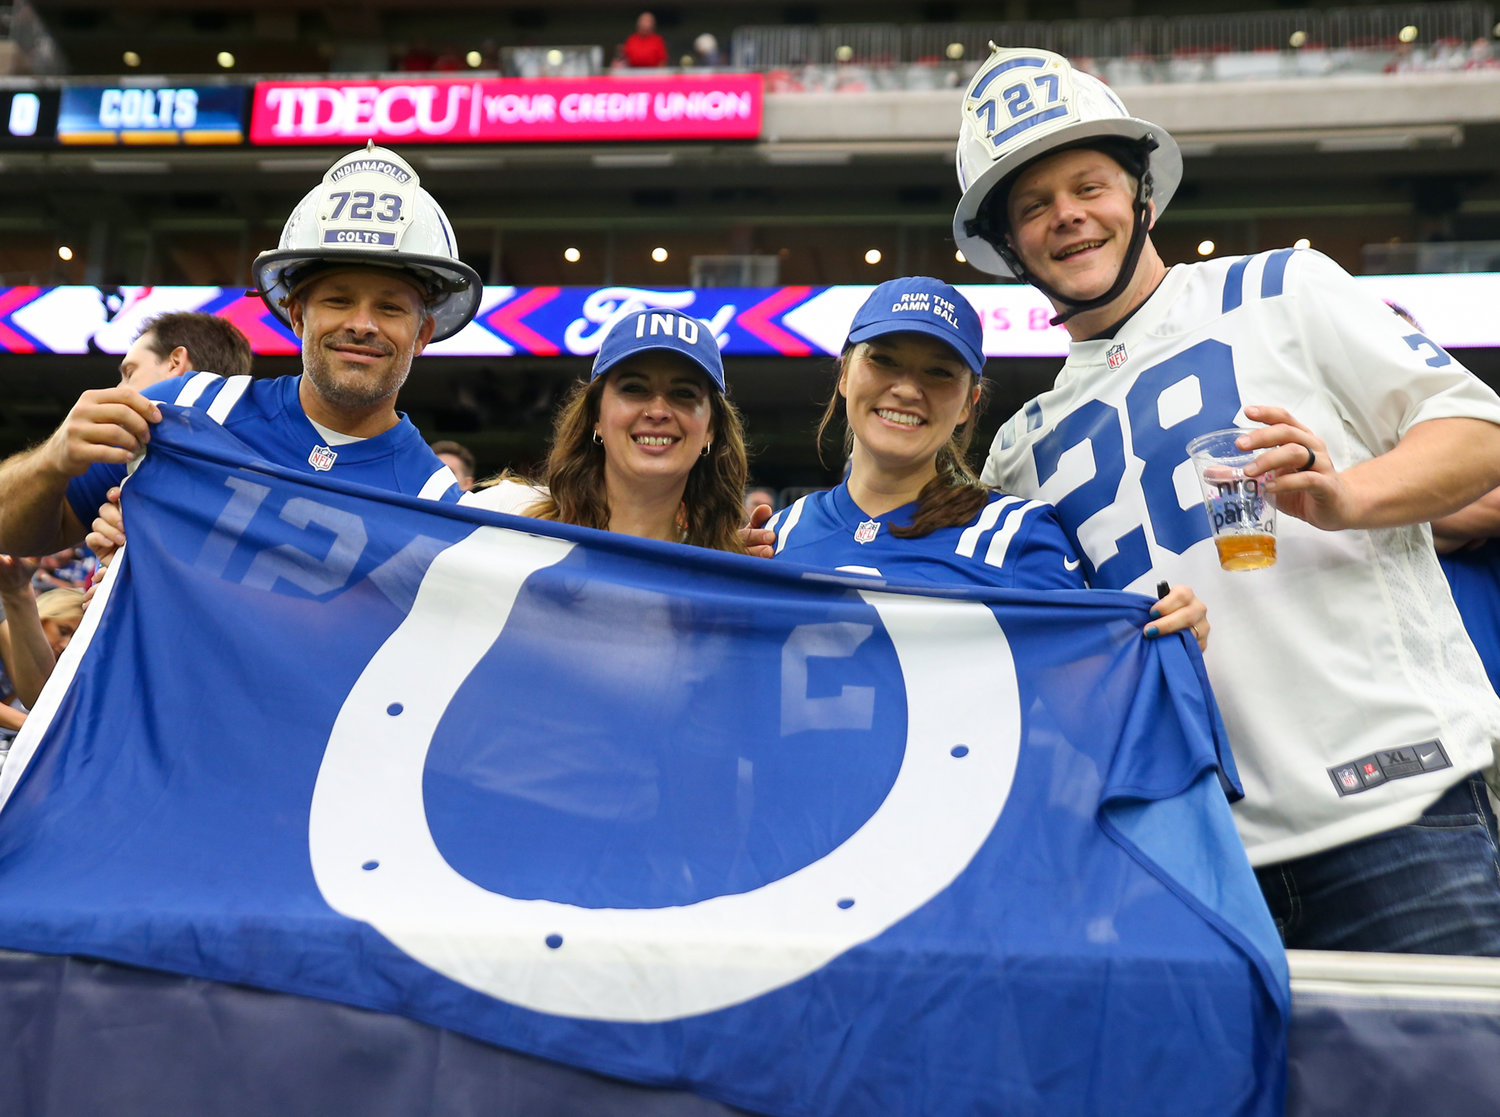 Indianapolis Colts fans before the start of an NFL game between the Texans and the Colts on December 5, 2021 in Houston, Texas.